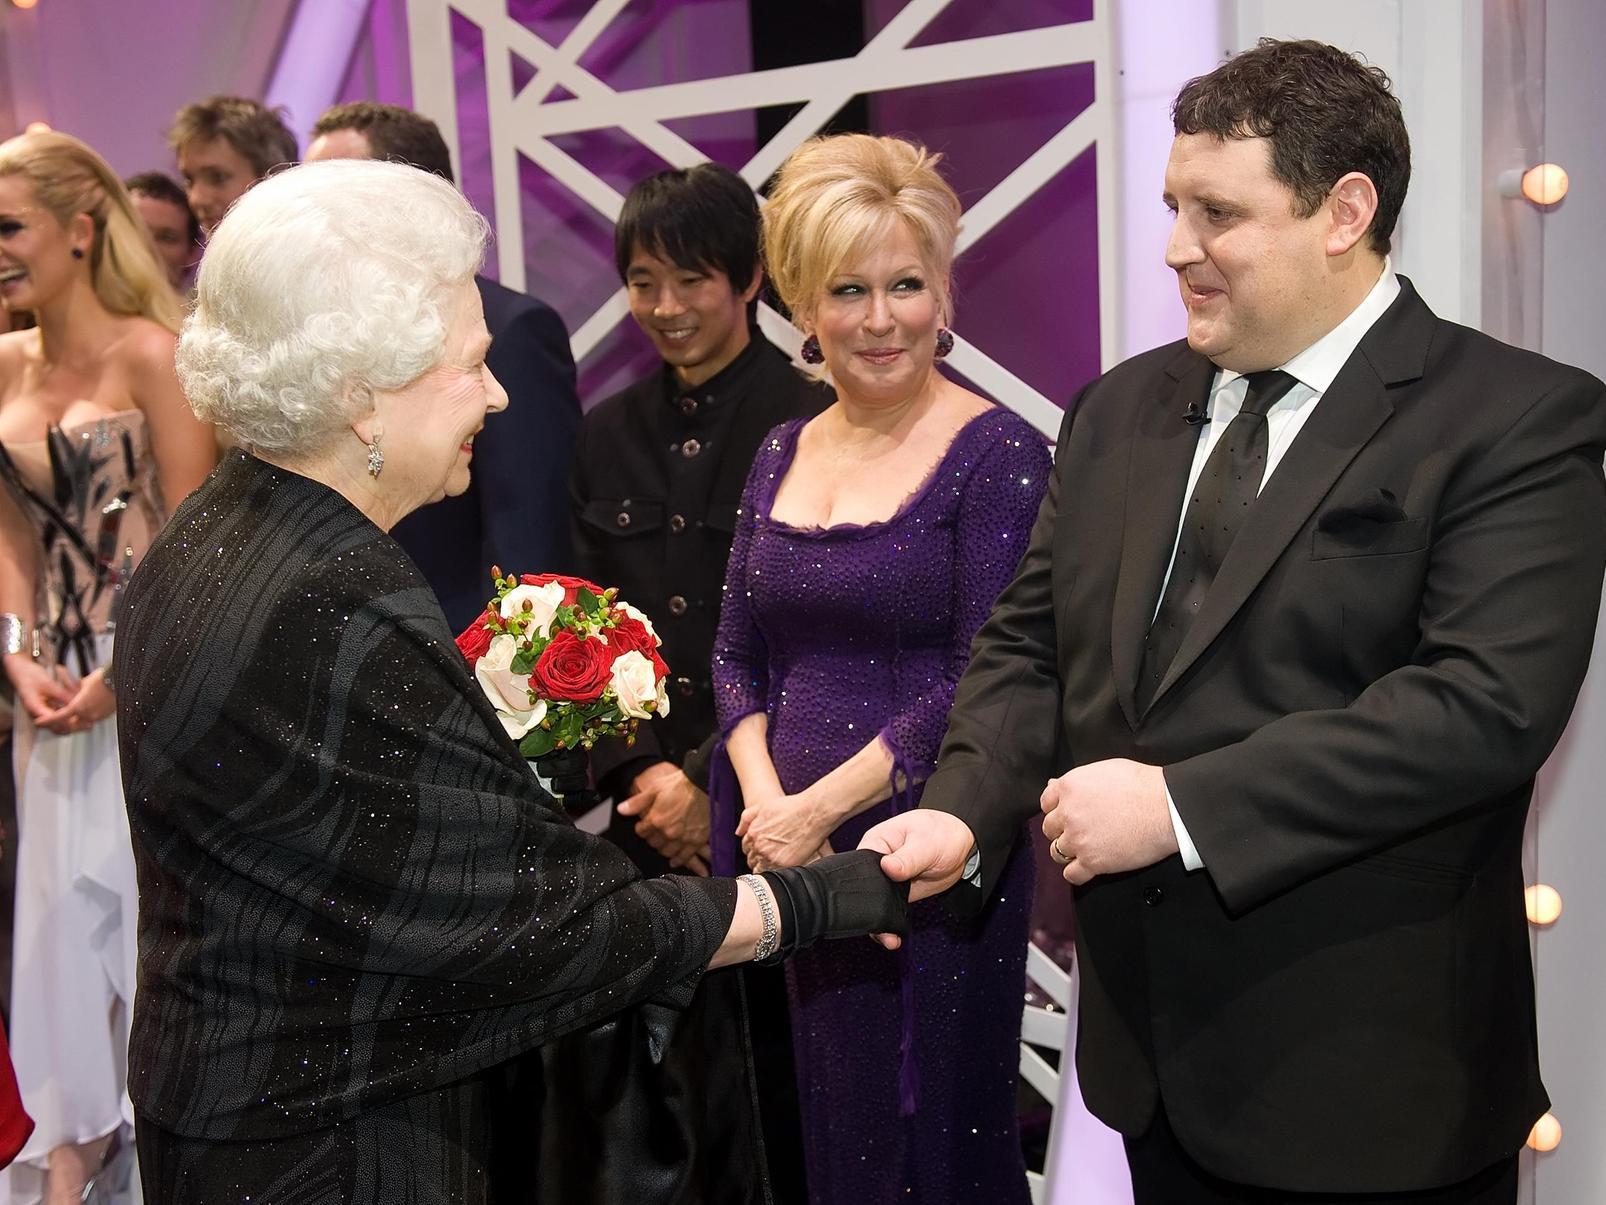 Peter Kay and Bette Midler meet Her Majesty the Queen